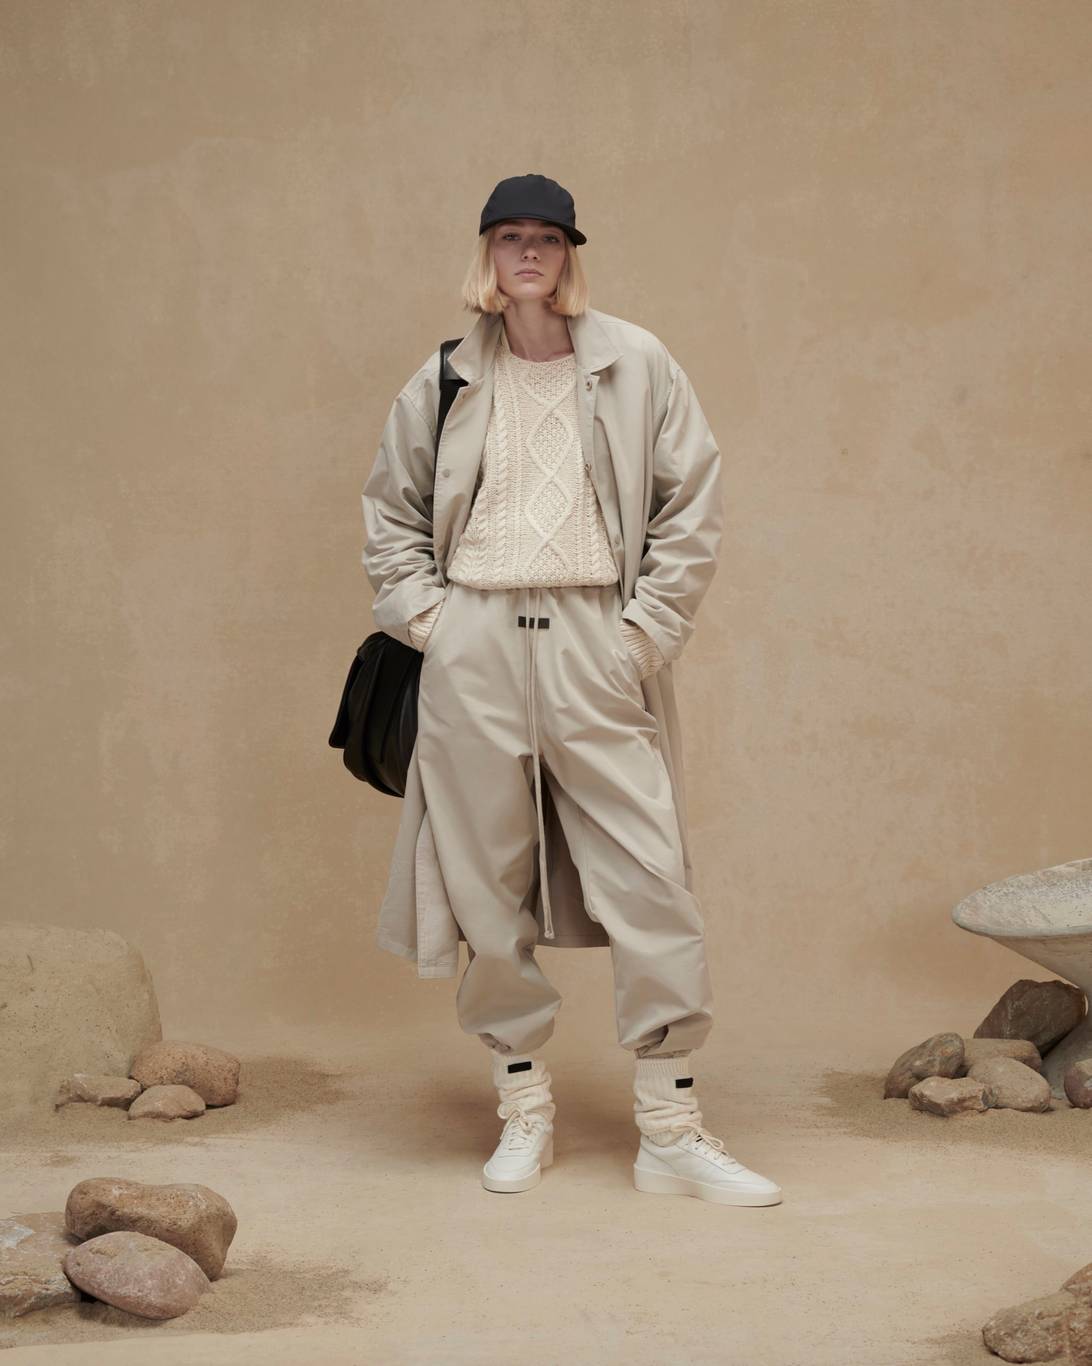 Tan Nylon Track Pants by Fear of God ESSENTIALS on Sale